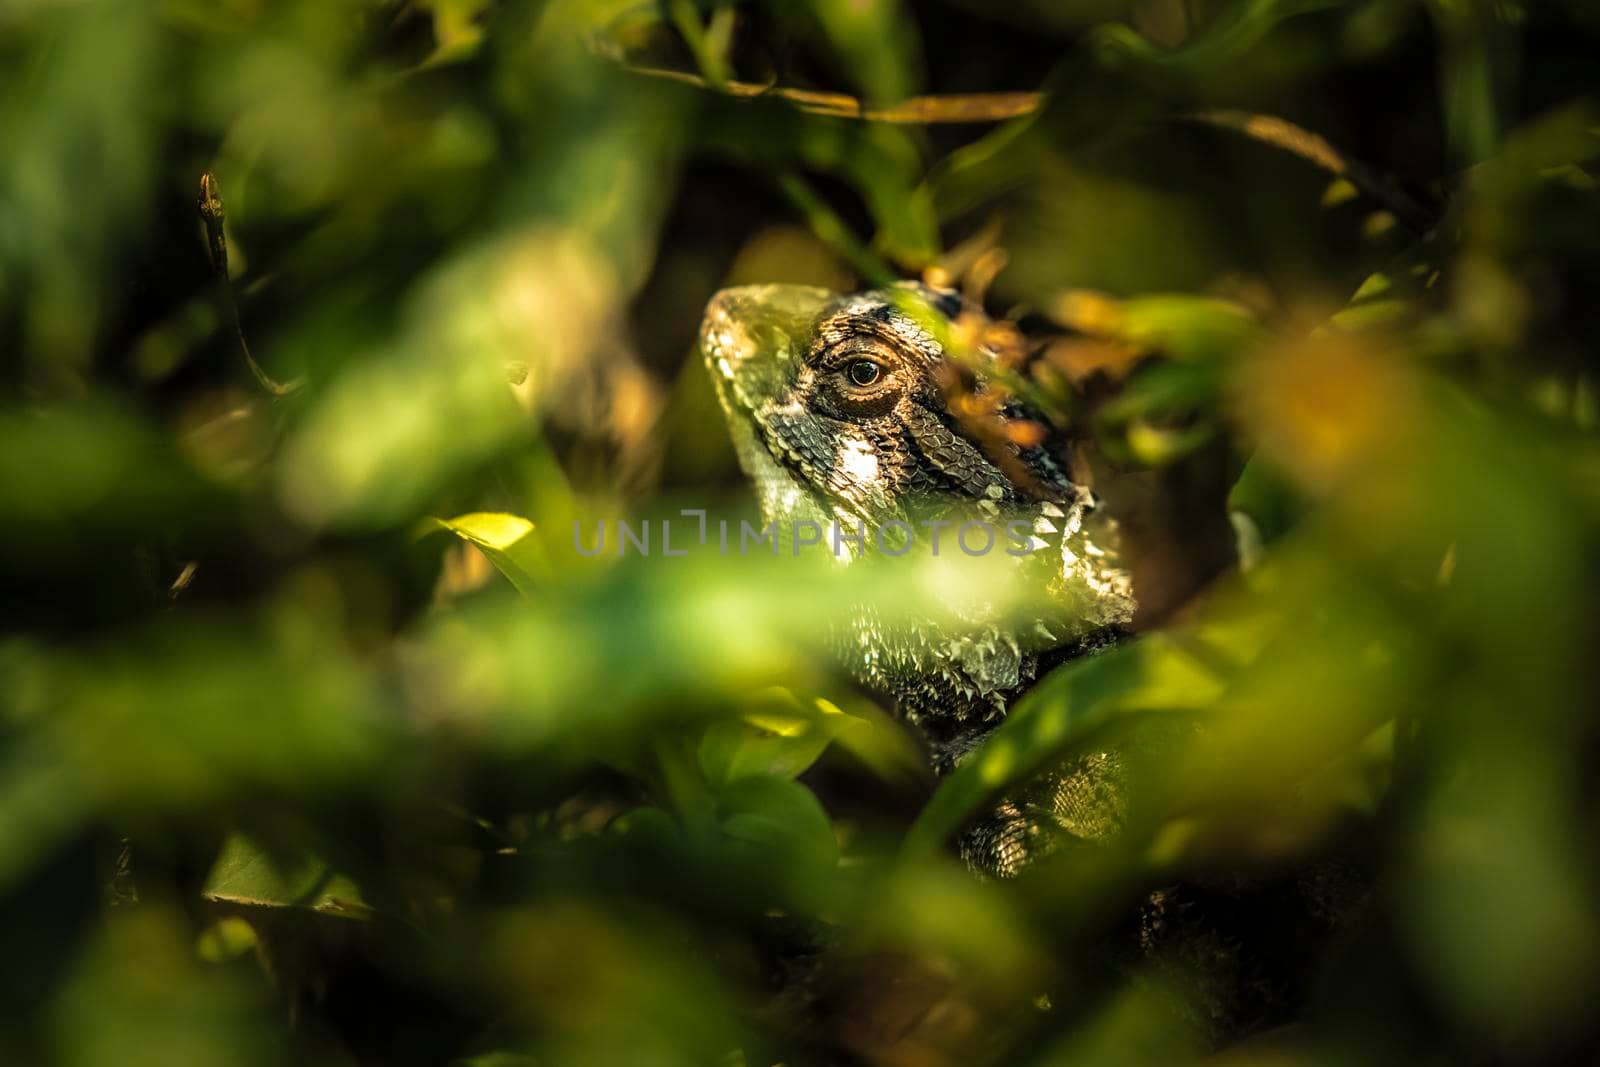 A grey lizard hiding amongst green leaves and looking out via a small gap